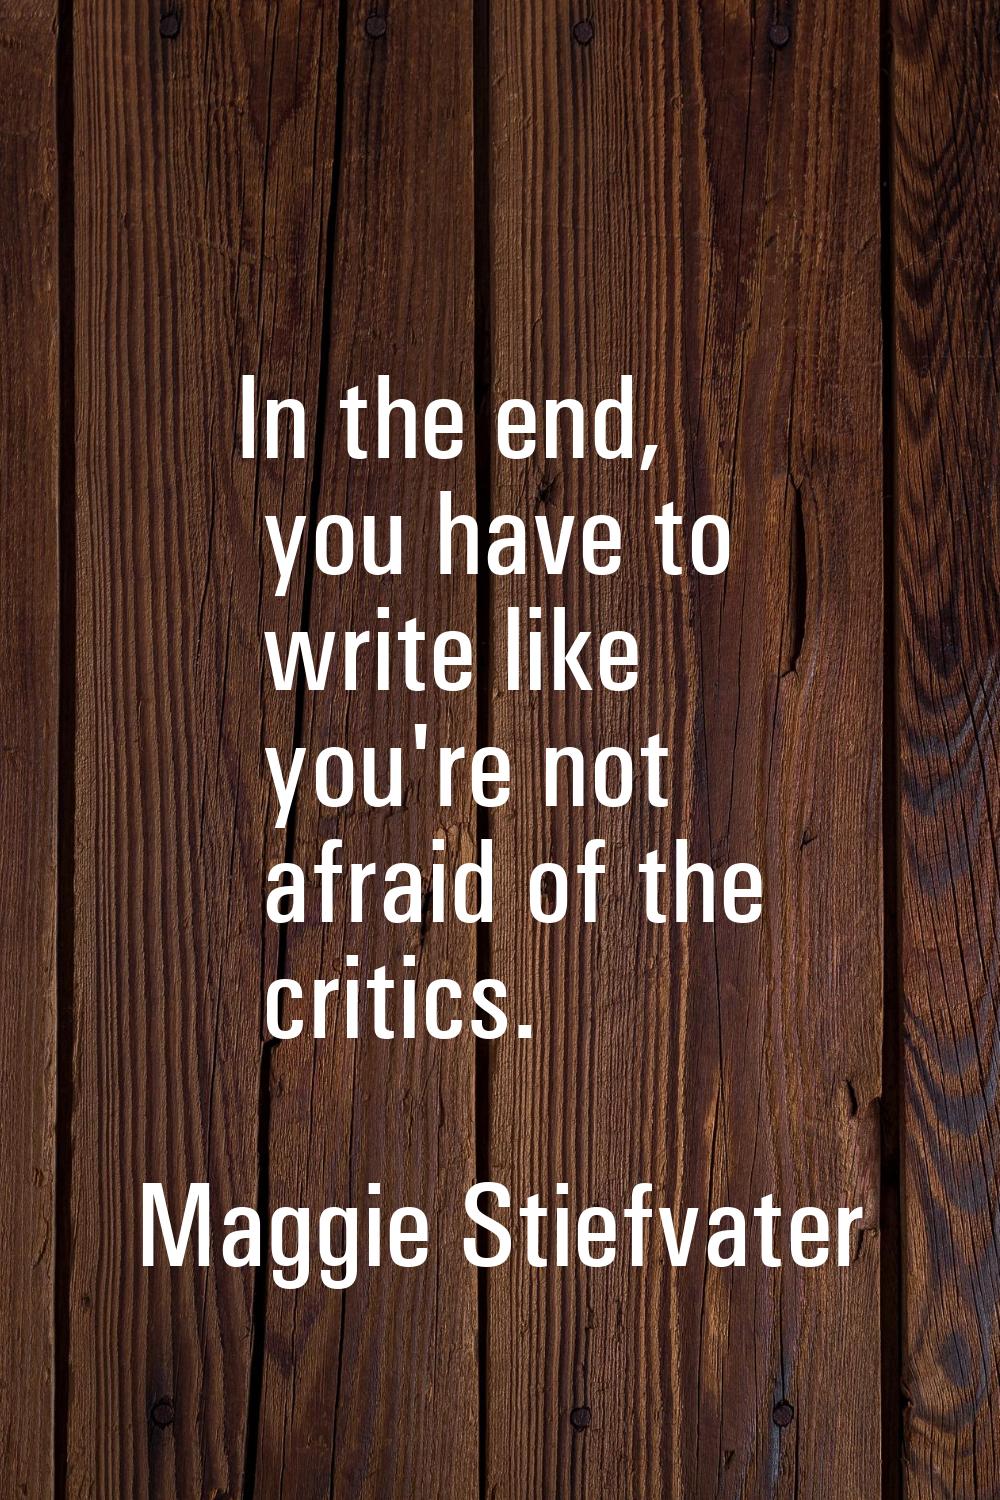 In the end, you have to write like you're not afraid of the critics.